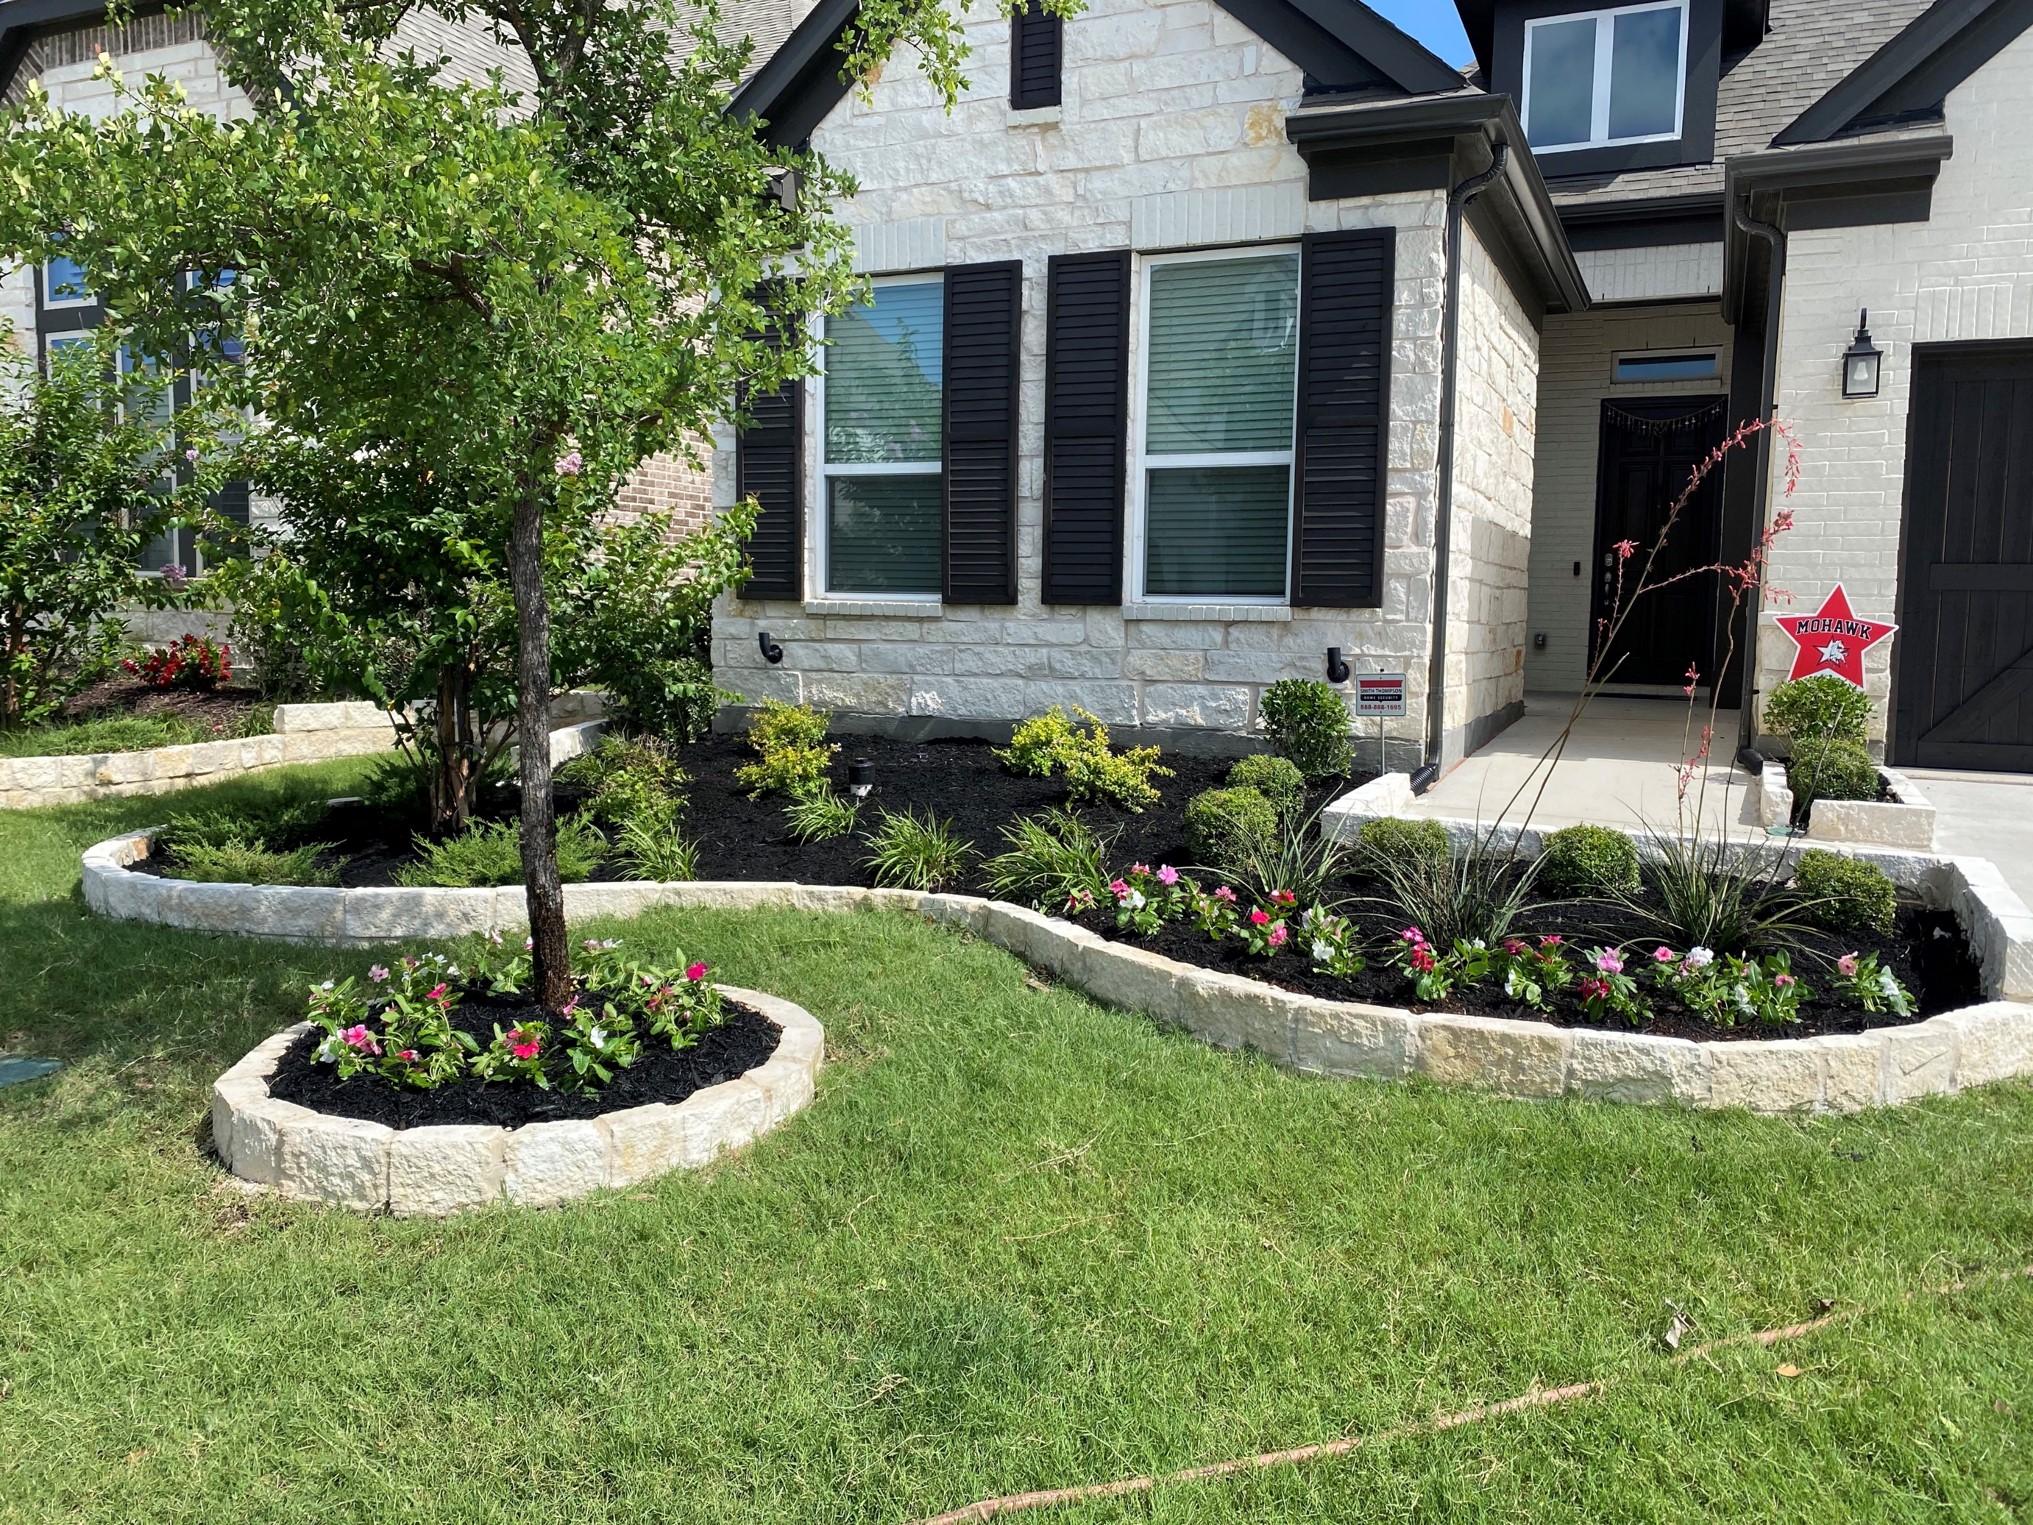 ABC landscaping professionals updating homeowners’ front yards with new plants and pavers